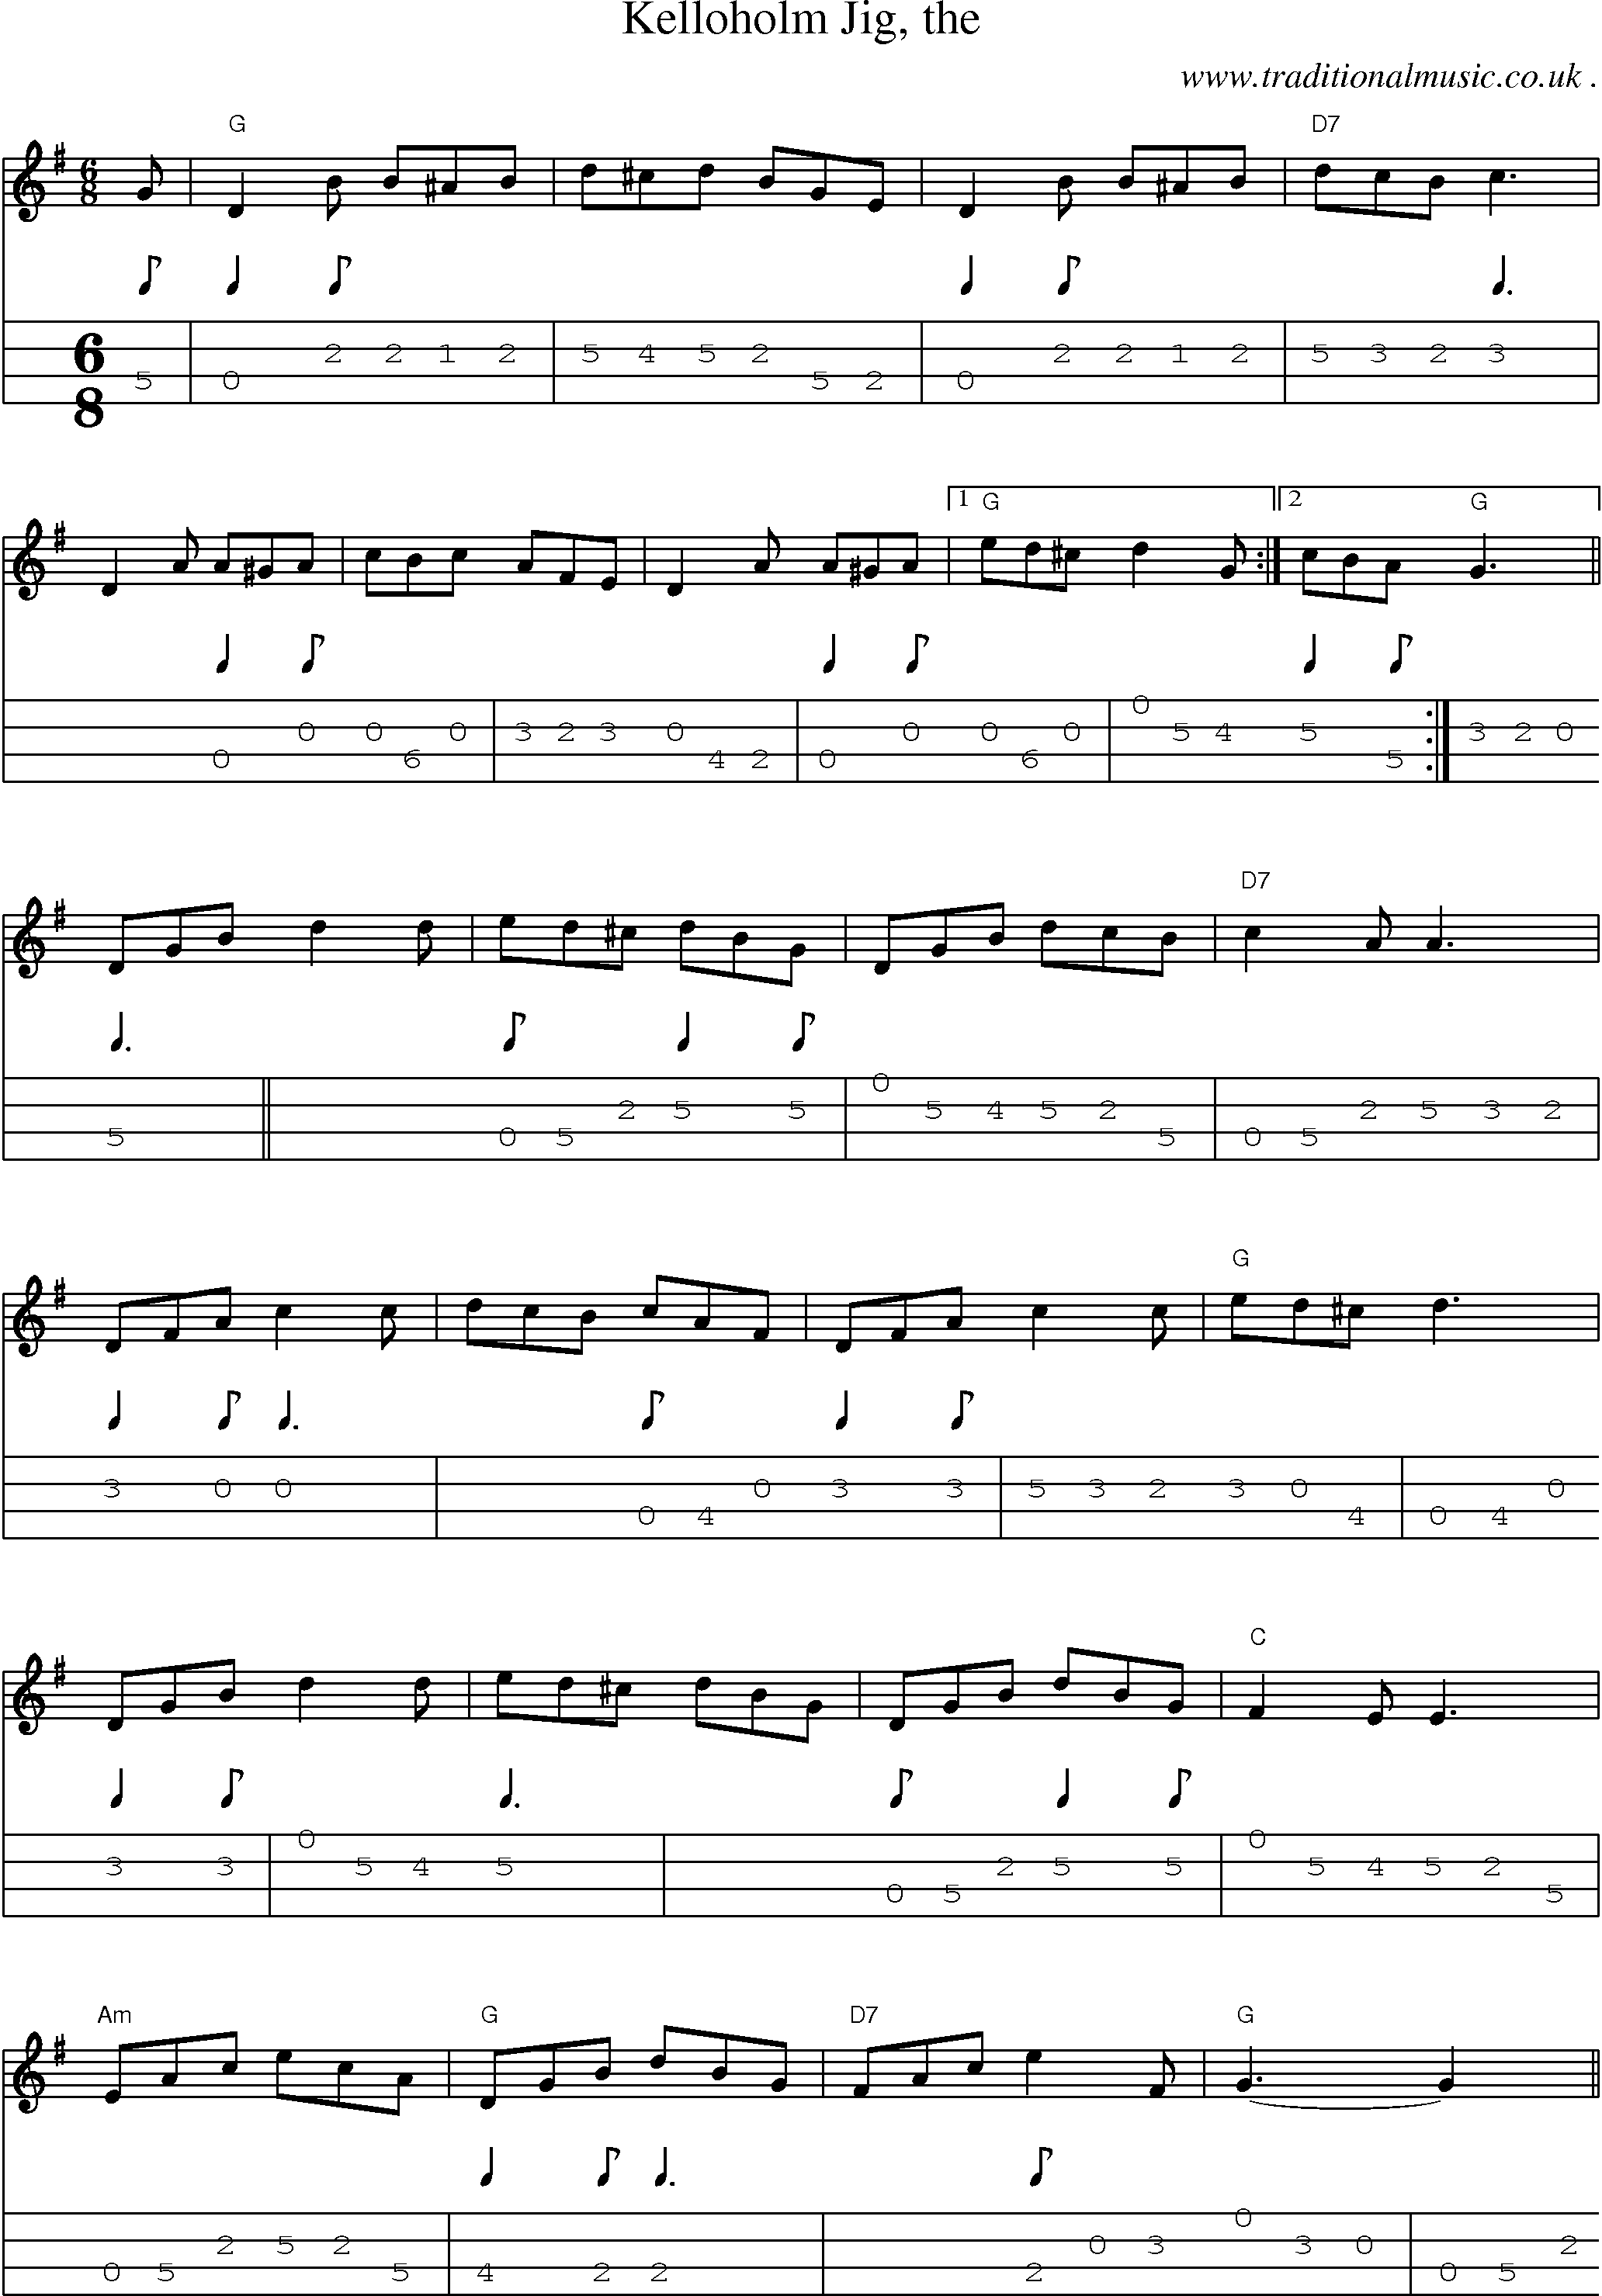 Sheet-music  score, Chords and Mandolin Tabs for Kelloholm Jig The